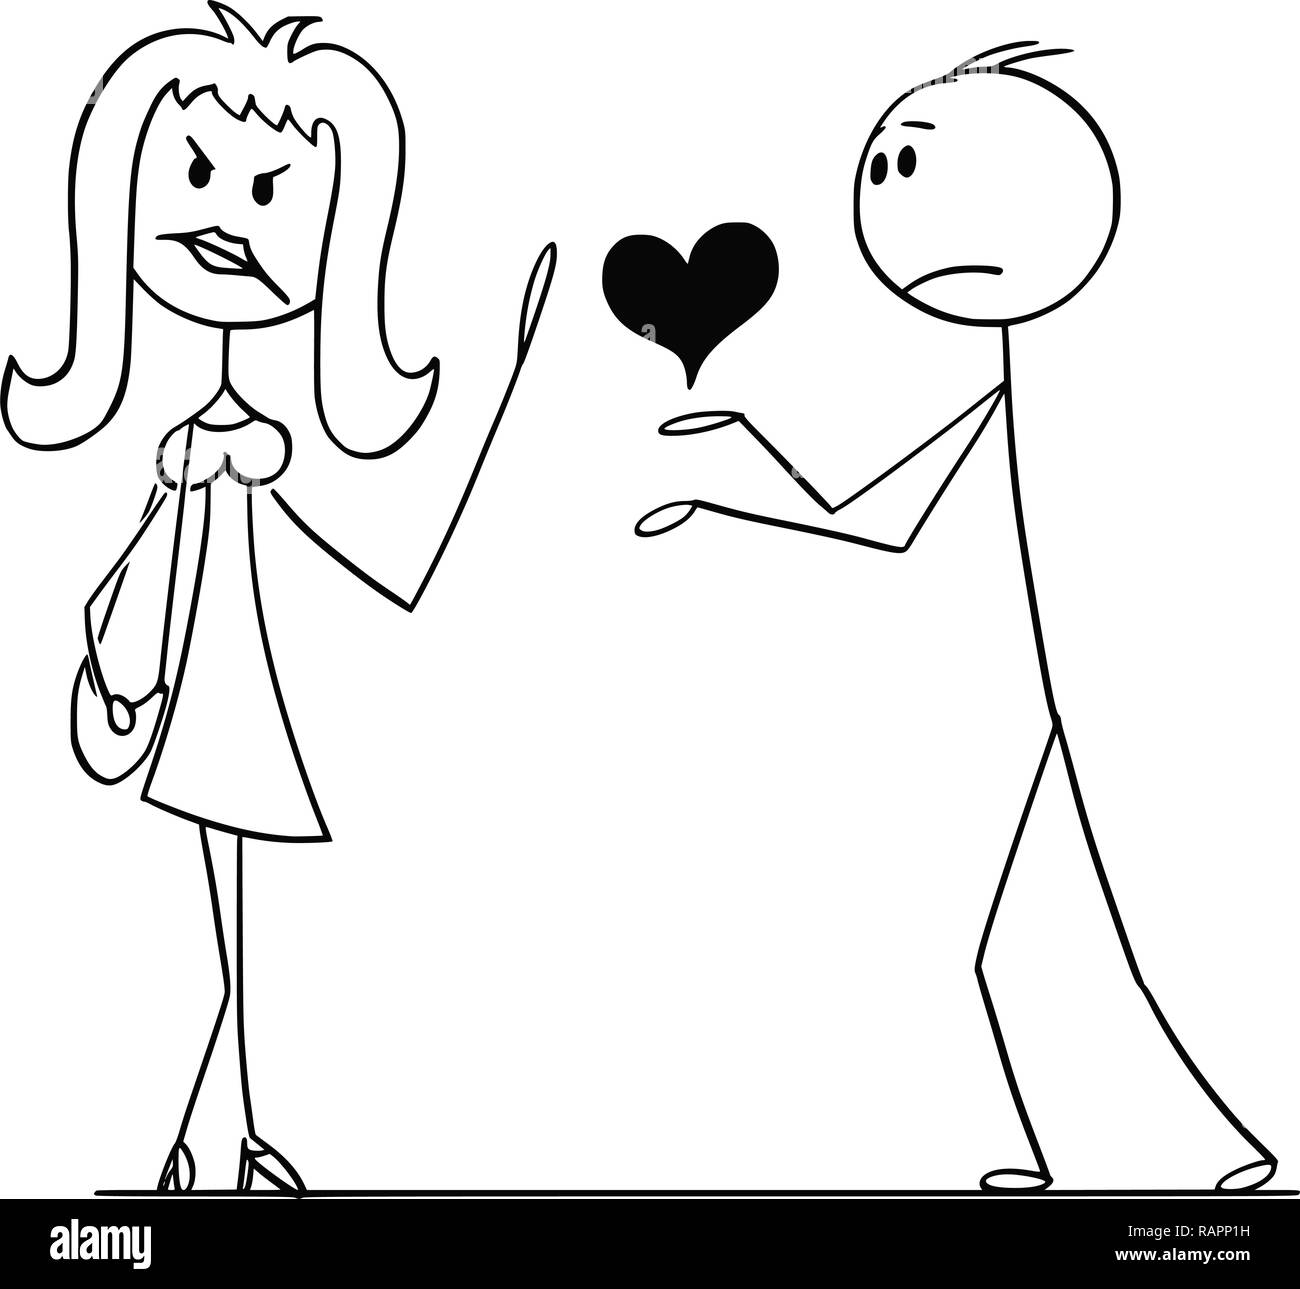 Cartoon of Woman Rejecting Heart and Love From Man Stock Vector